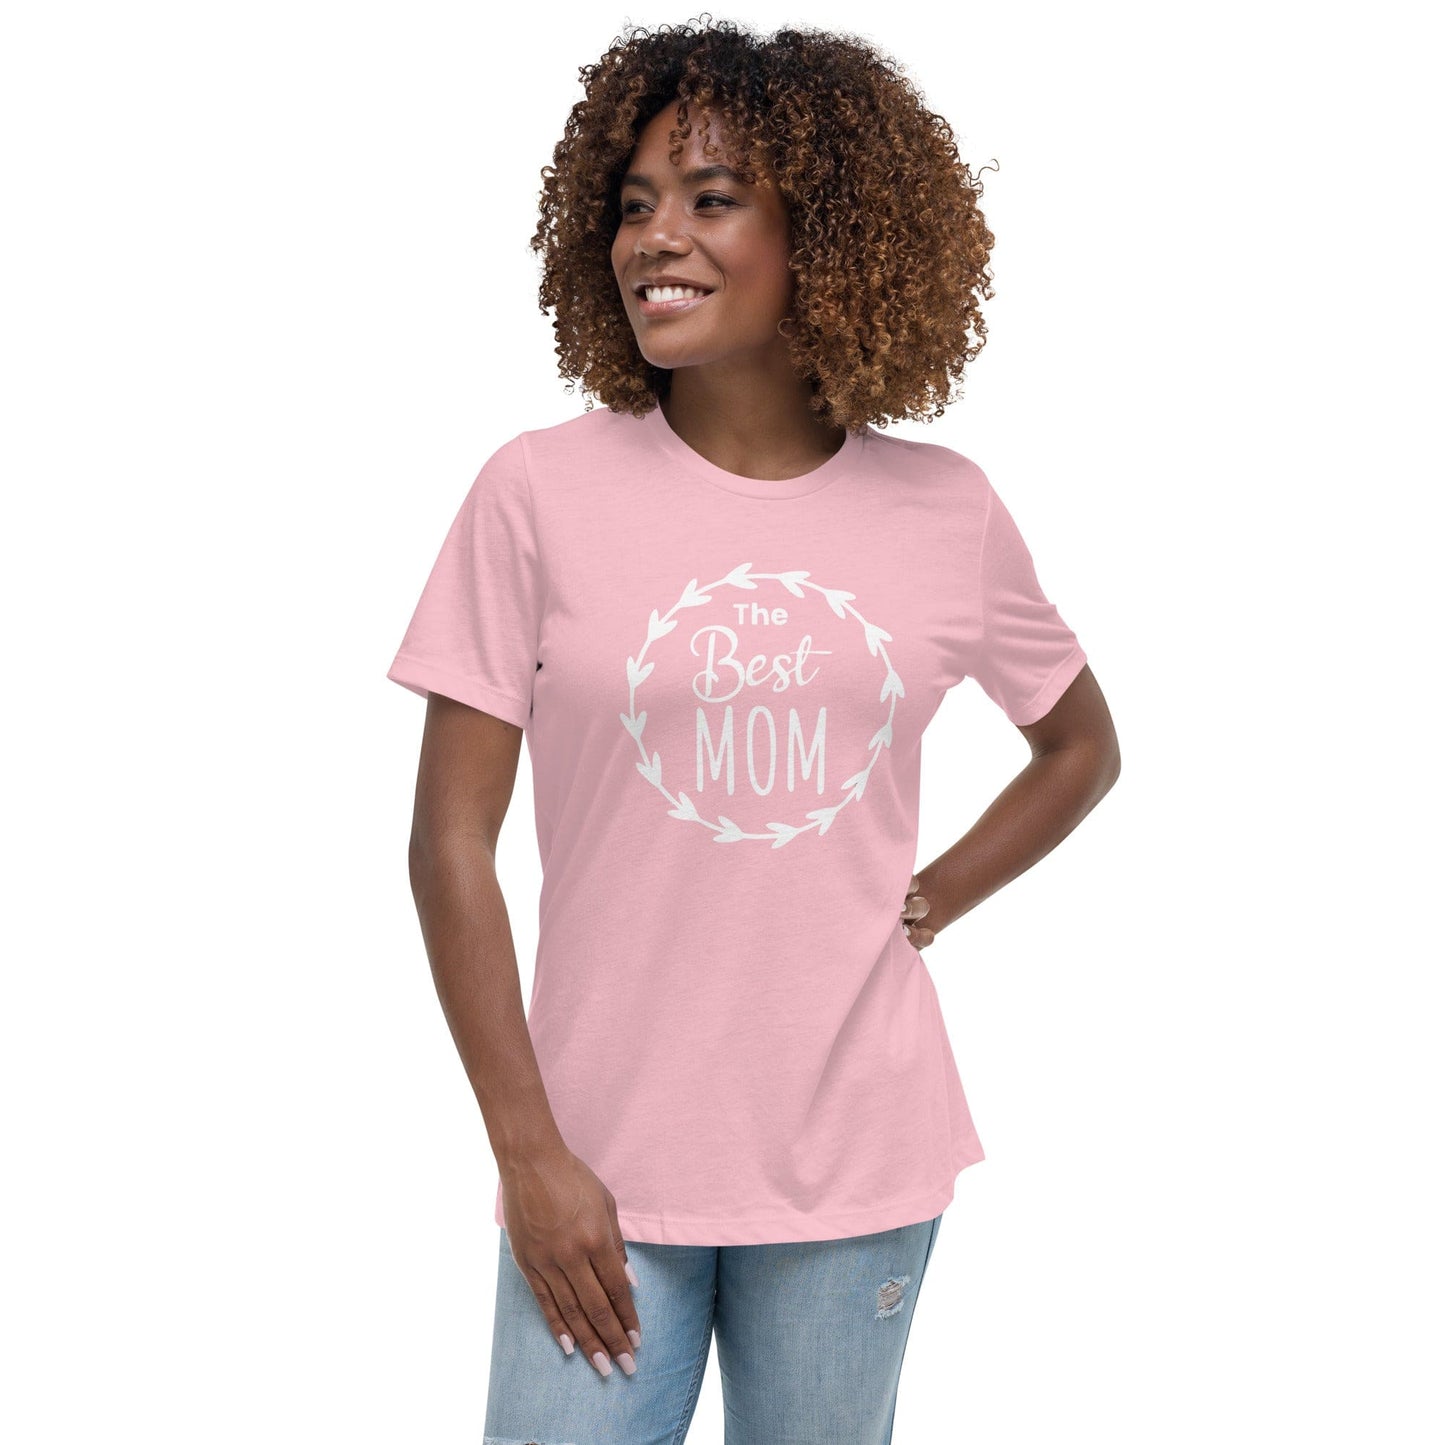 The Best Mom T-Shirt